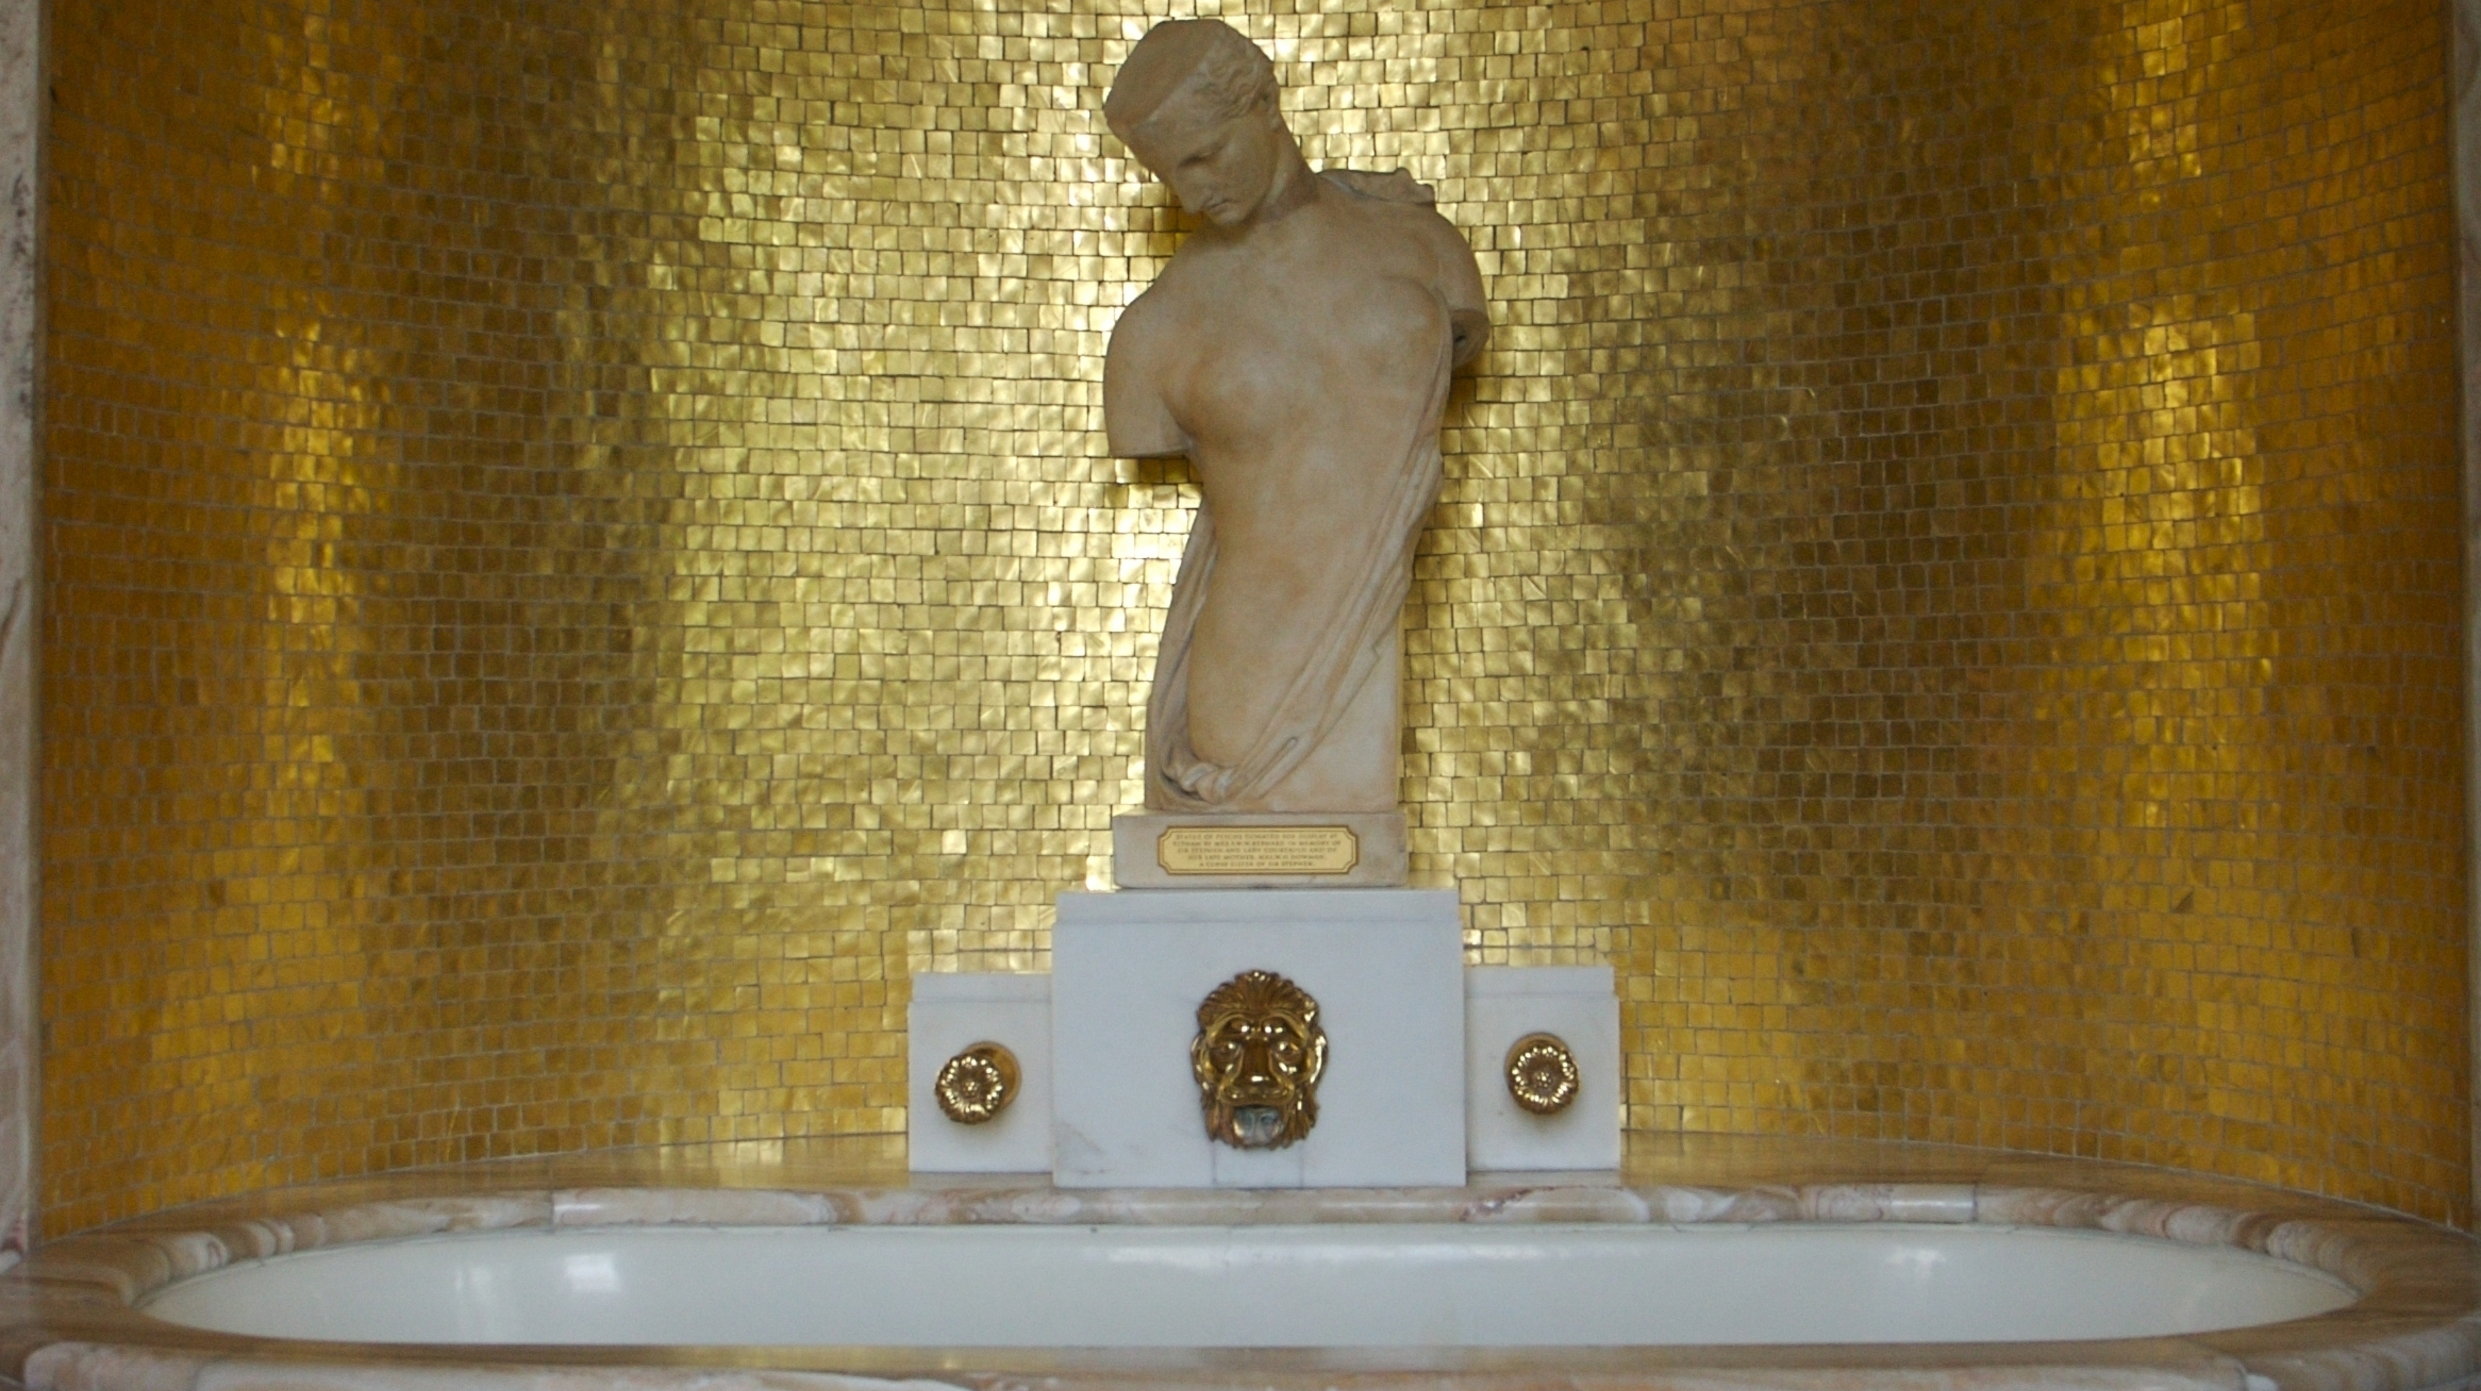 Virginia's-bathroom-with-a-statue-of-Psyche-and-a-gold-moasic-taile-designed-by-Peter-Malcrida